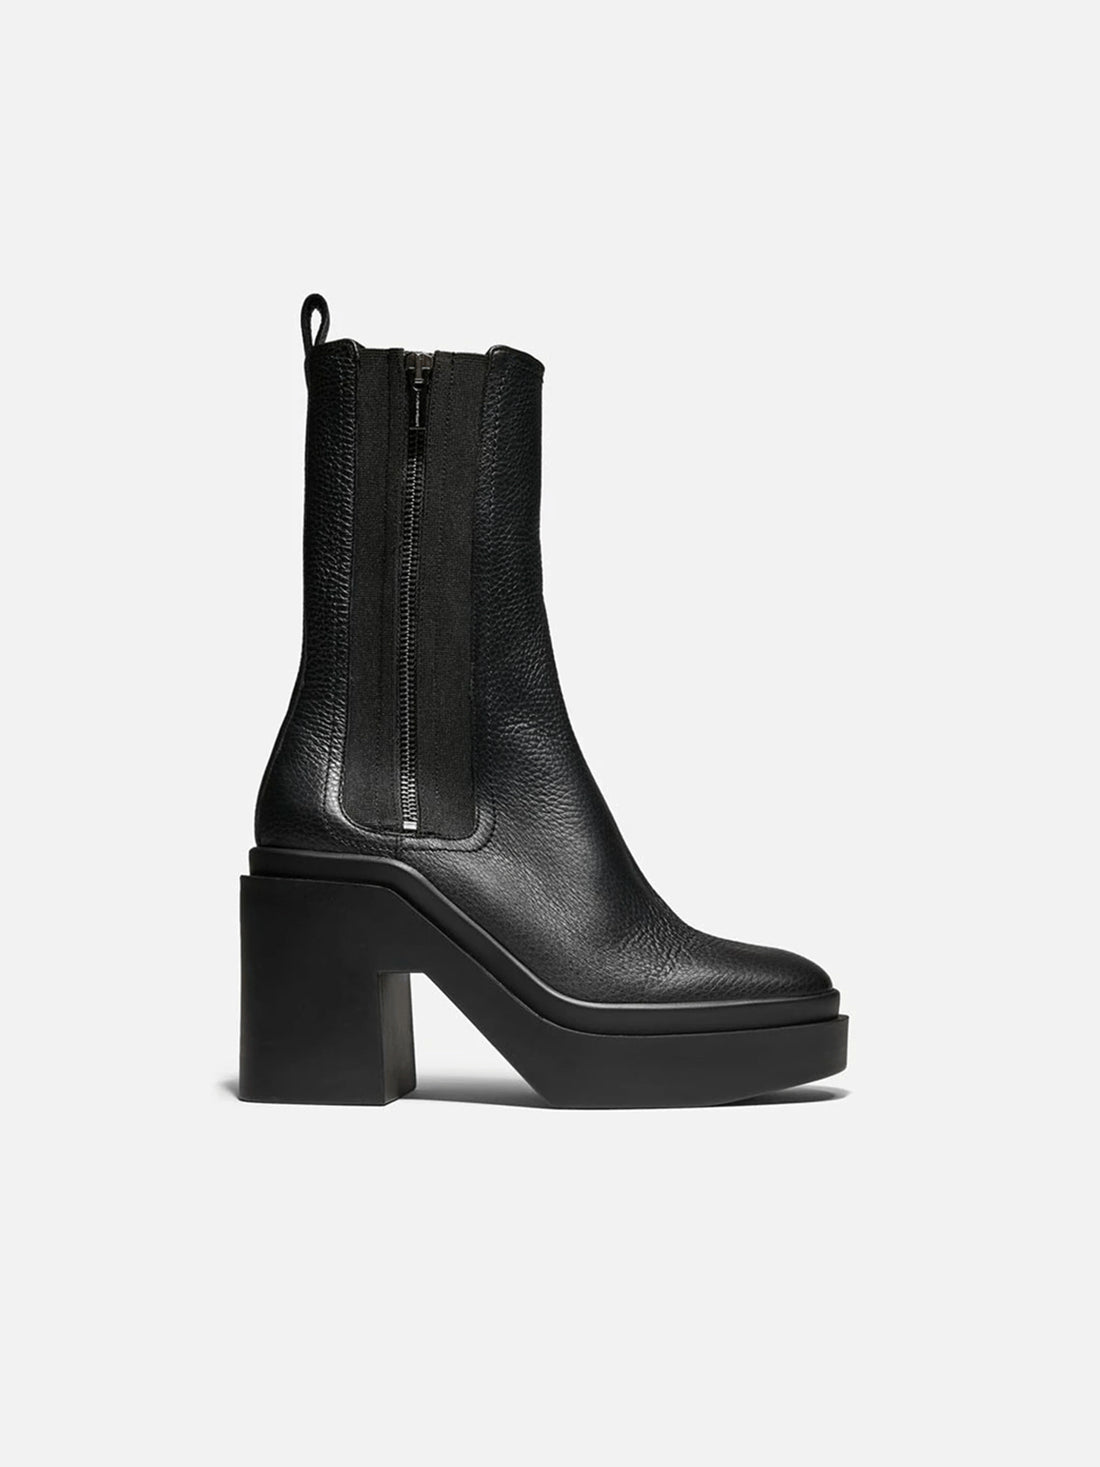 NOLAN ankle boots, calf leather black || OUTLET